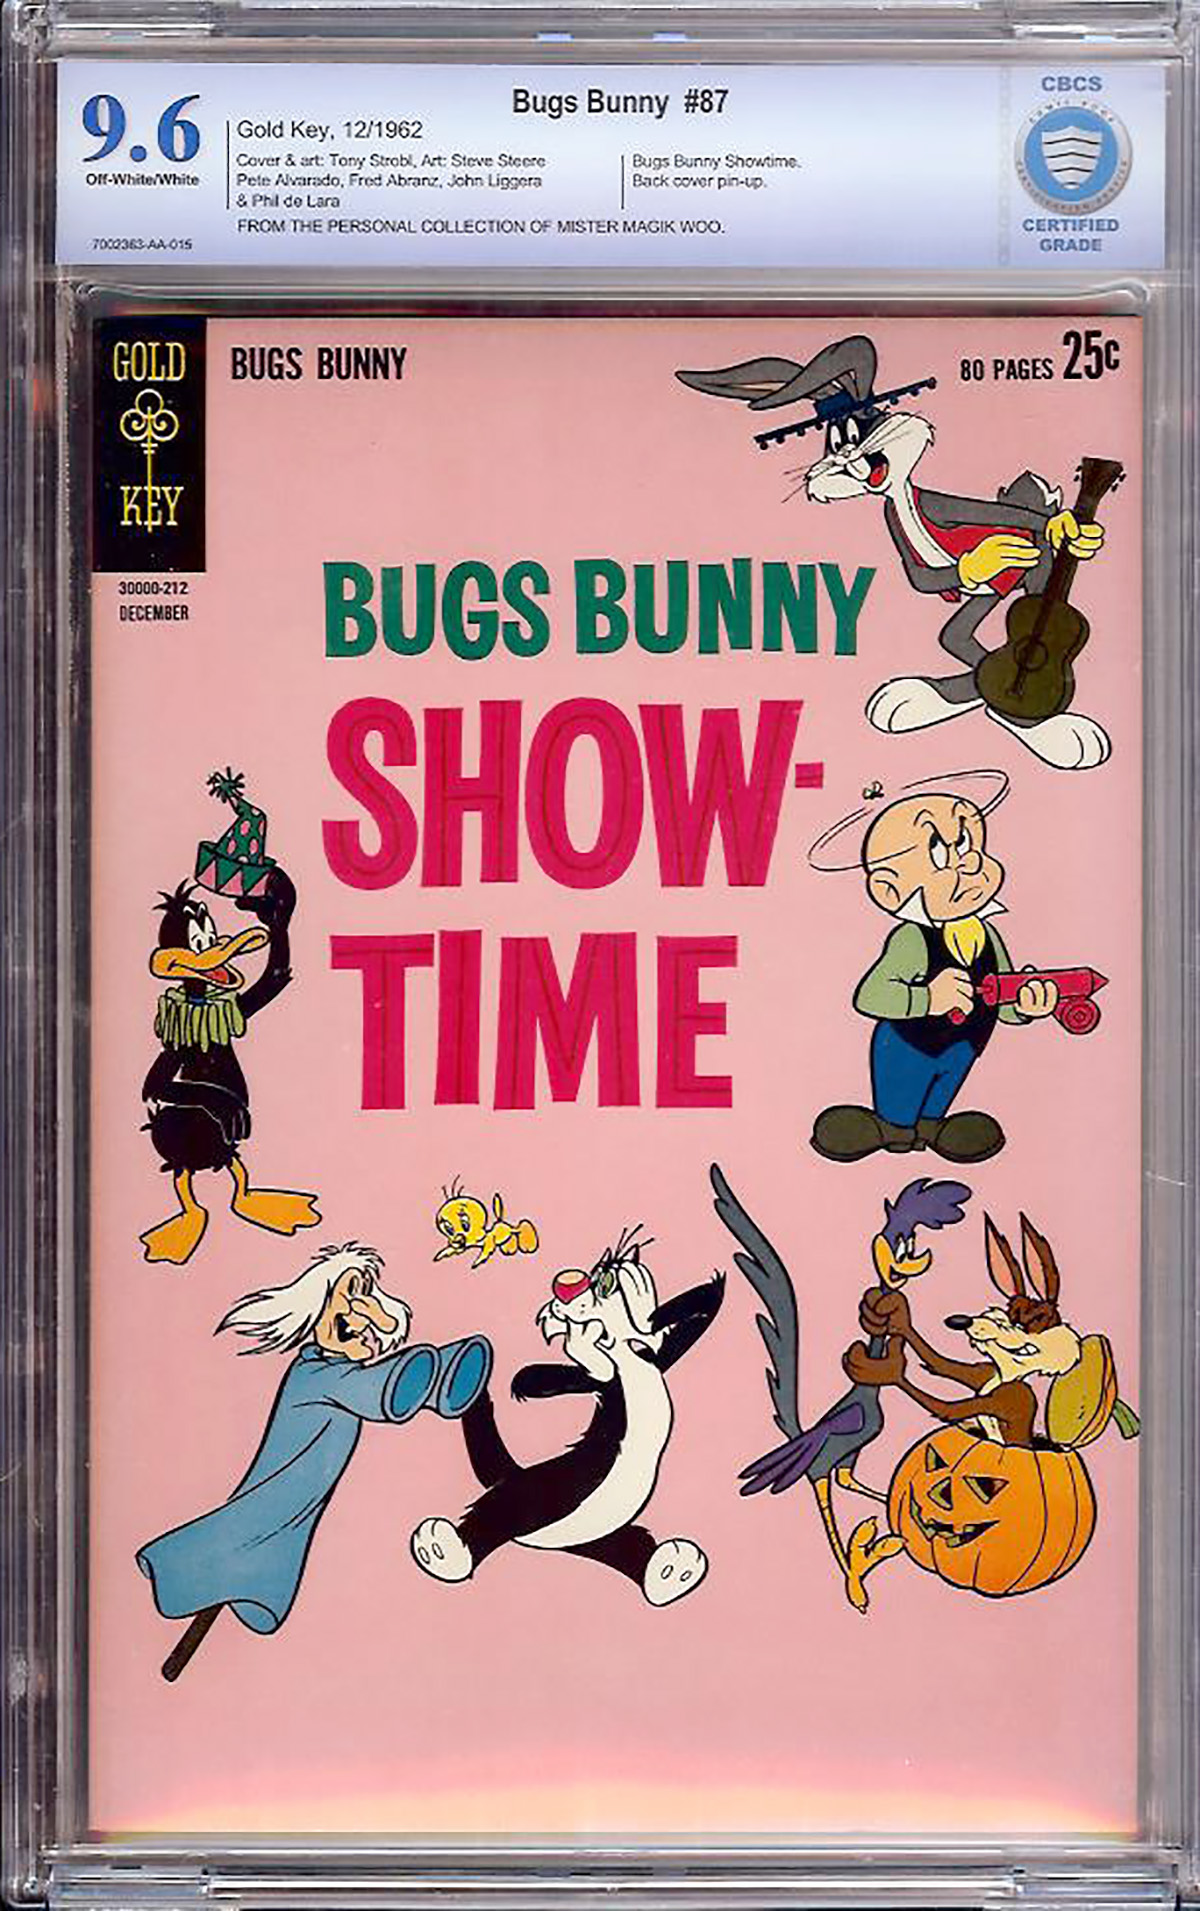 Bugs Bunny #87 CBCS 9.6 ow/w Mister Magik Woo Collection